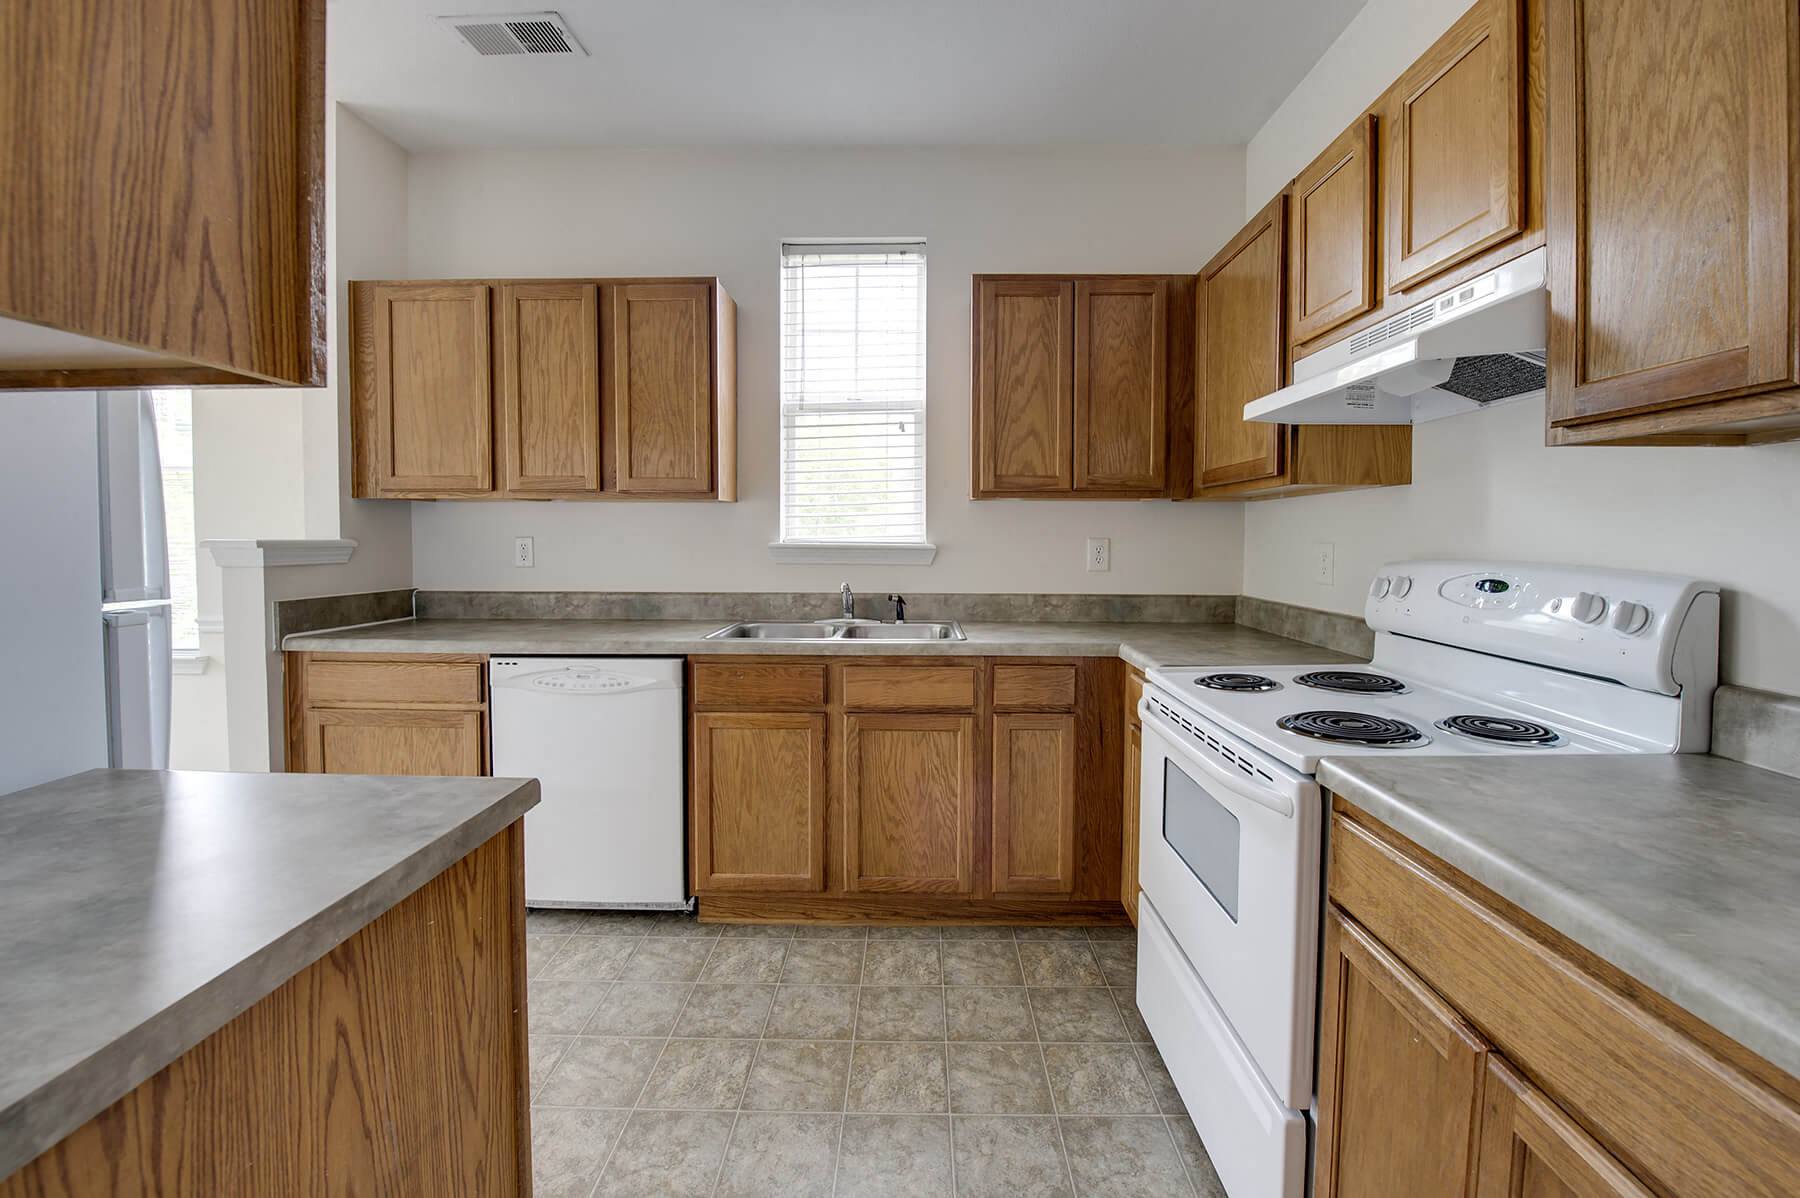 A spacious kitchen with white appliances at the Grand Oaks Apartments in Chester, Virginia.